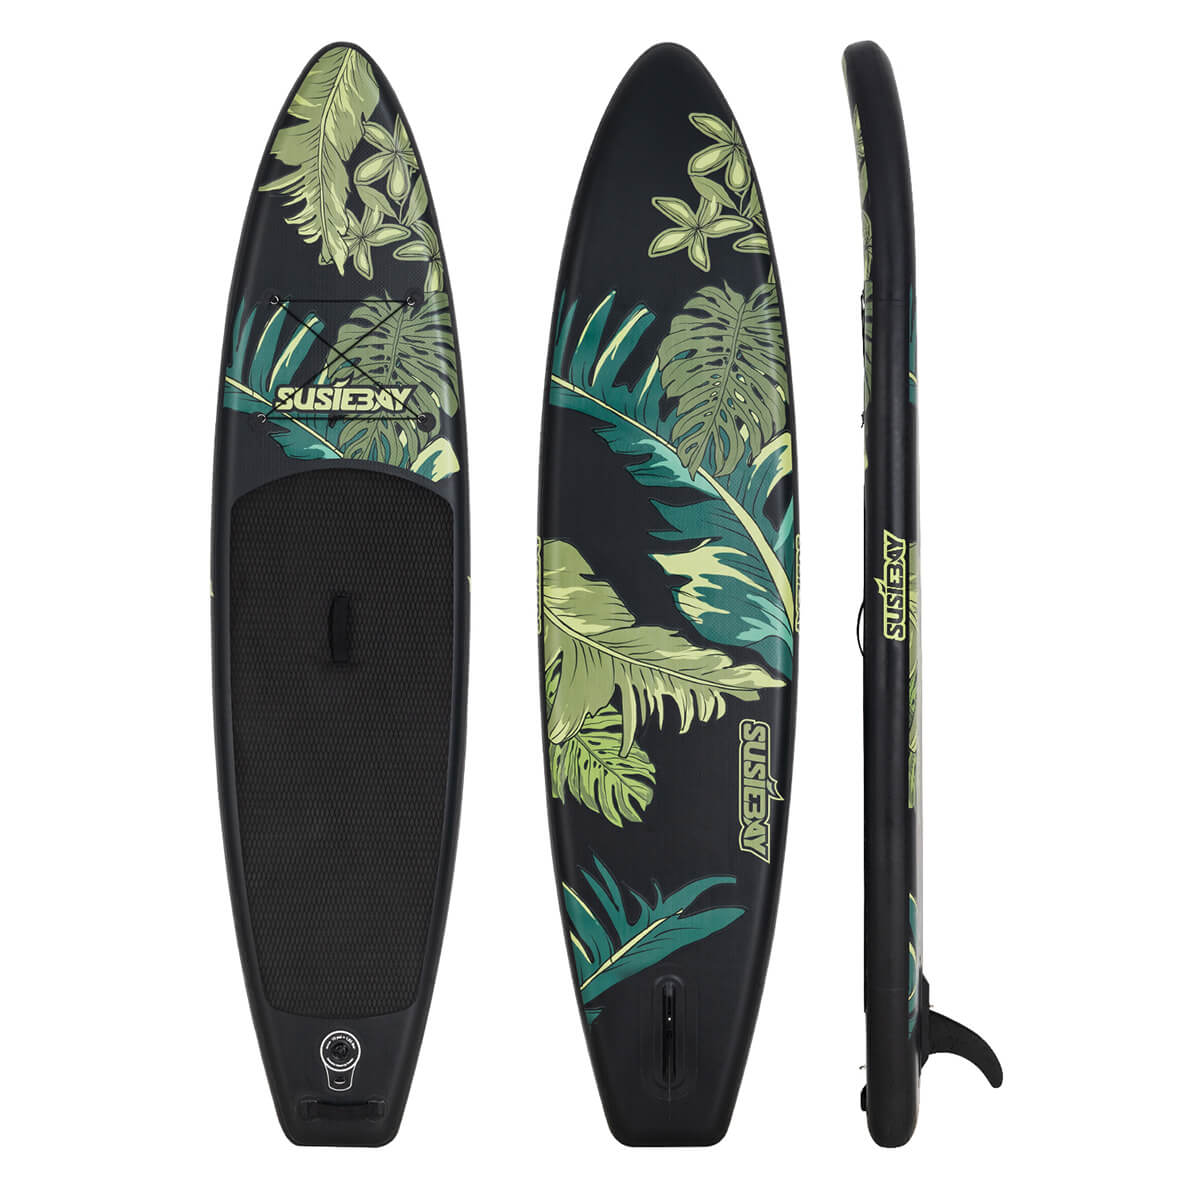 Stand Inflatable Up Yoga Board, Paddle Susiebay Floating Board Board, Paddle Paddle